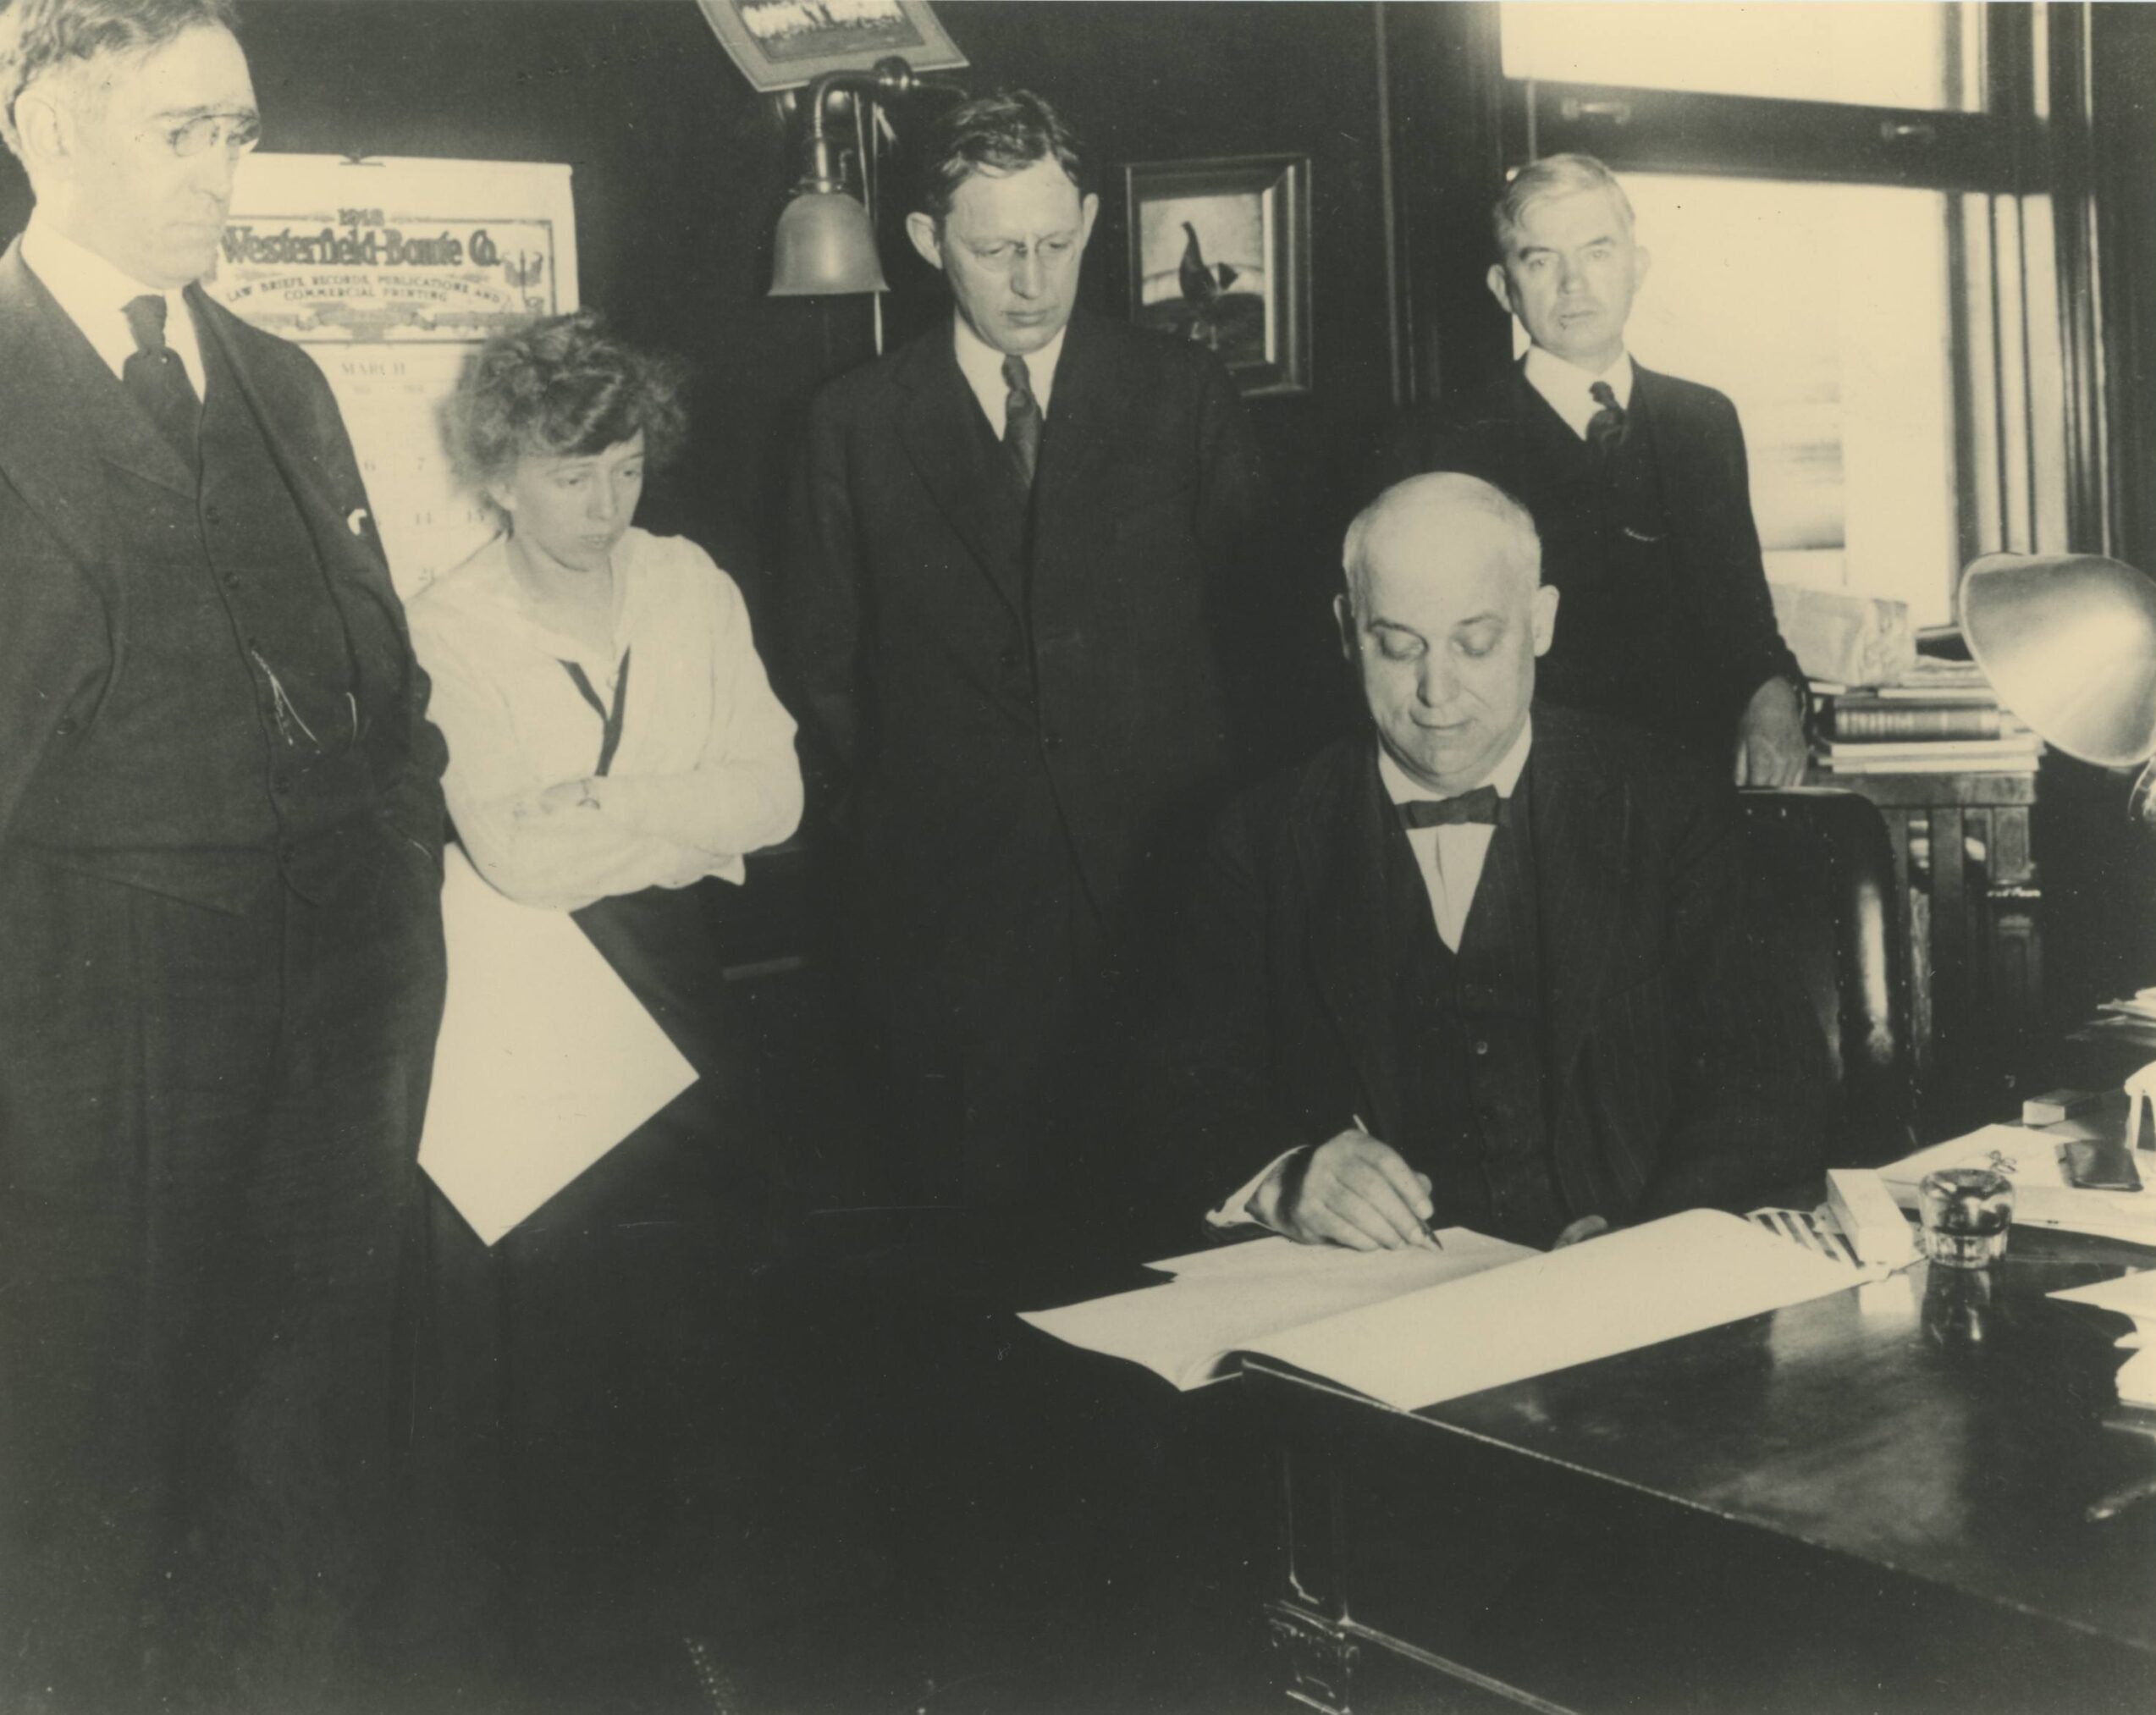 Richard Stoll, Wallace Muir, William Townsend, James Park signing a document